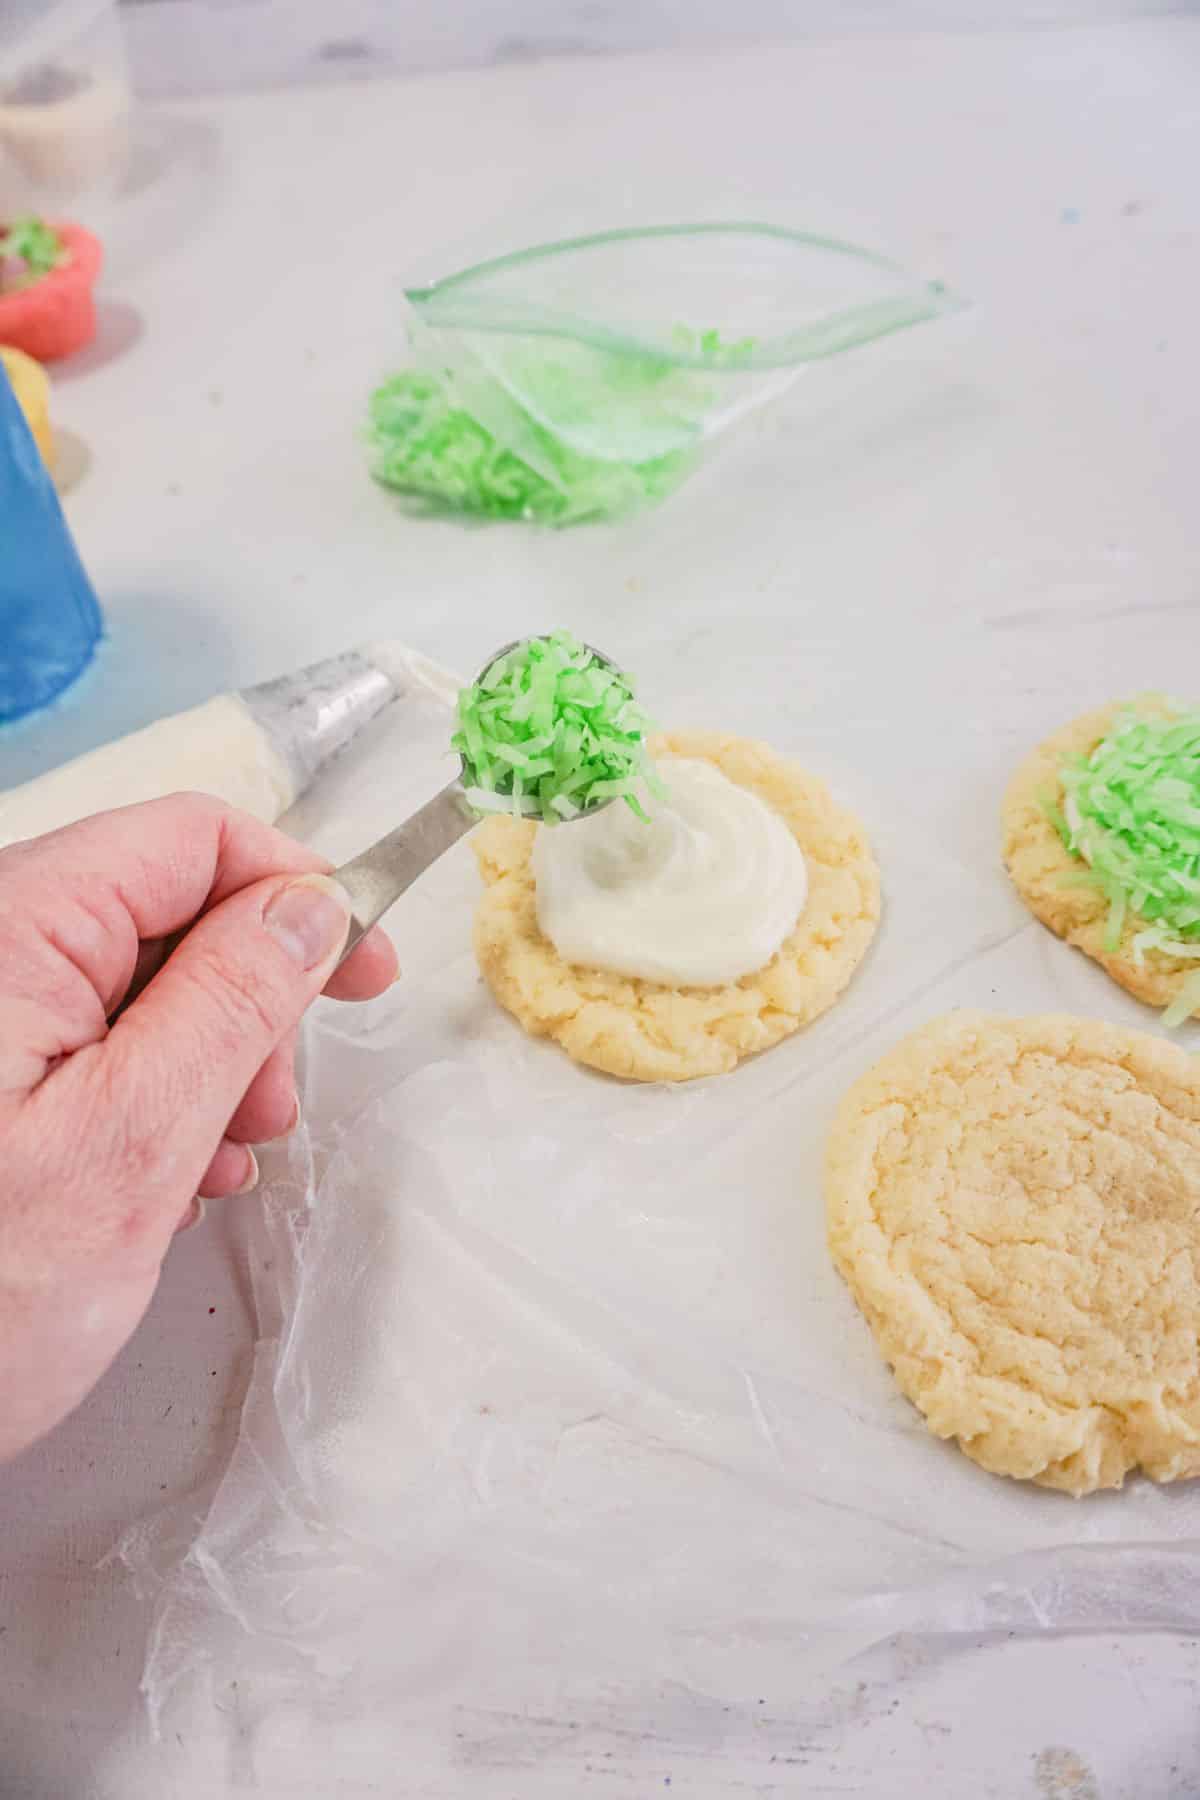 a tablespoon of the green coconut are being placed into the cookies.